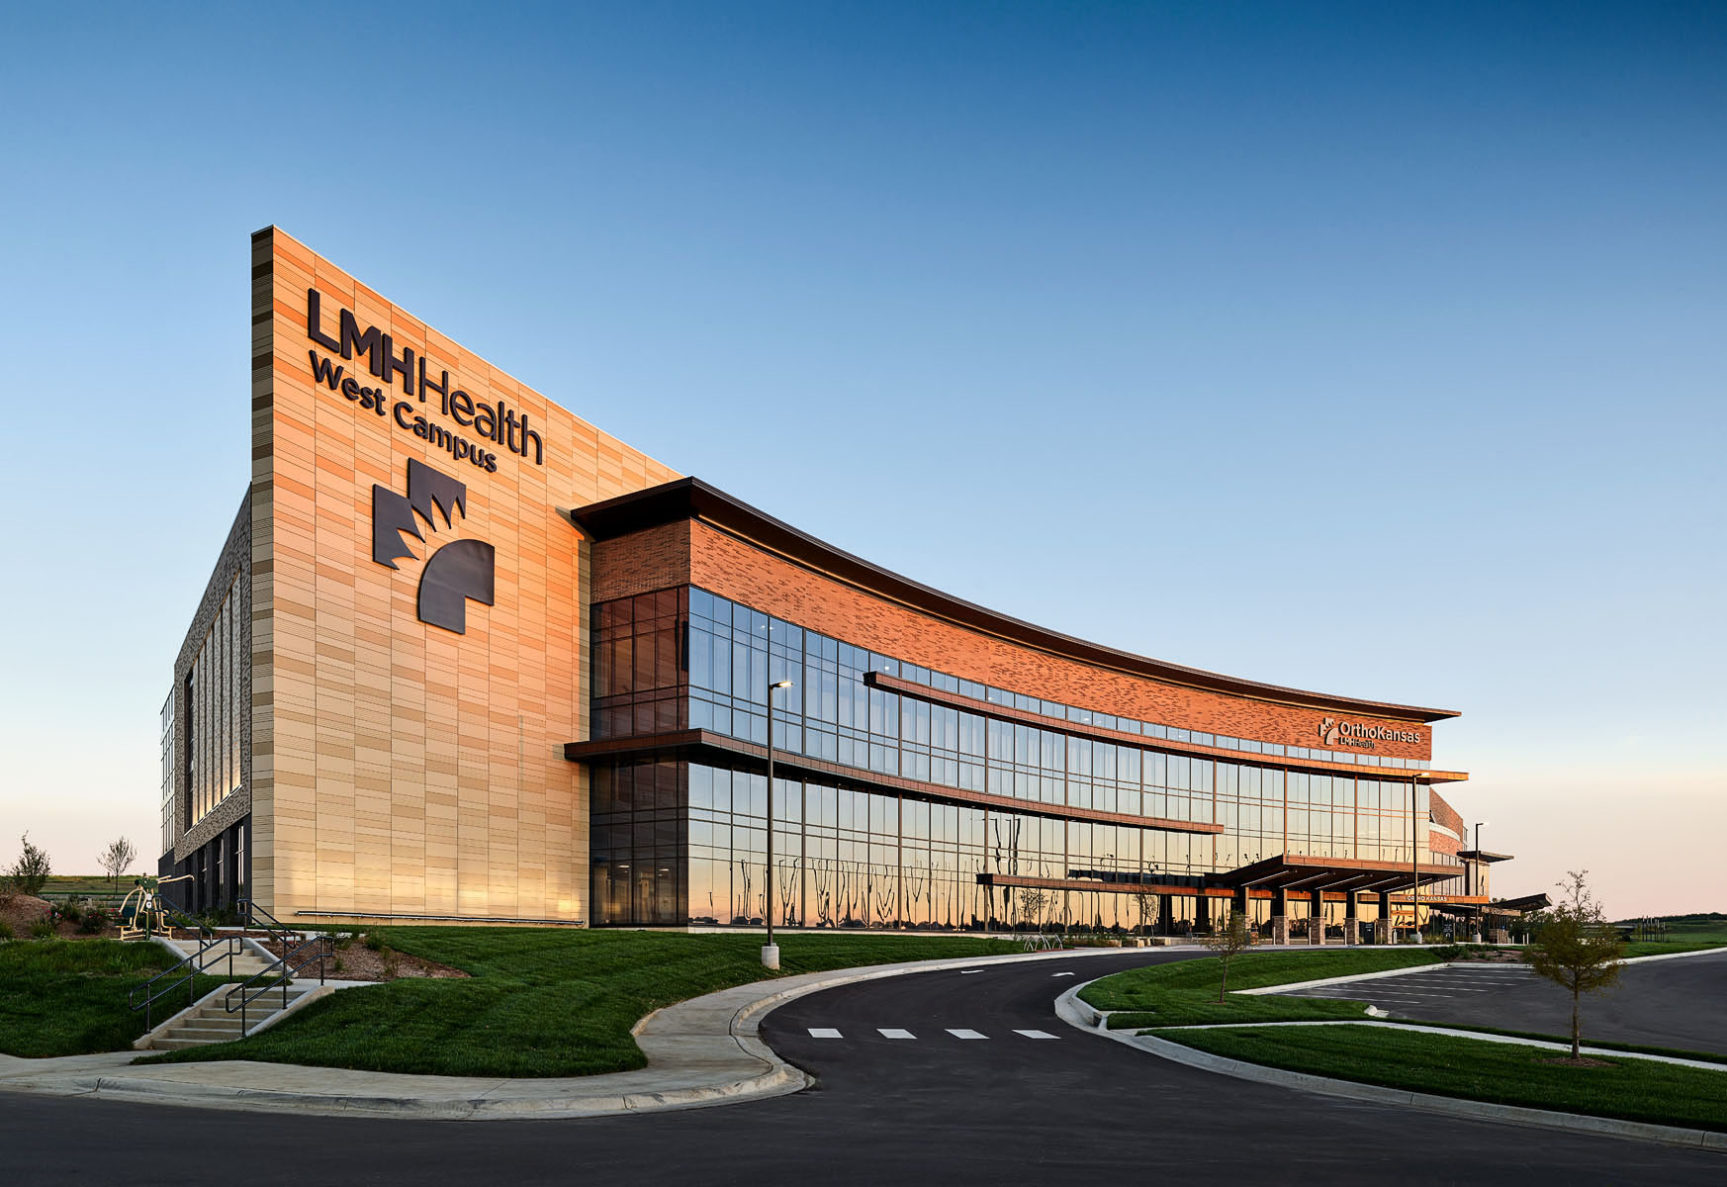 LMH Health West during sunset. The sunset is reflecting off of the many windows